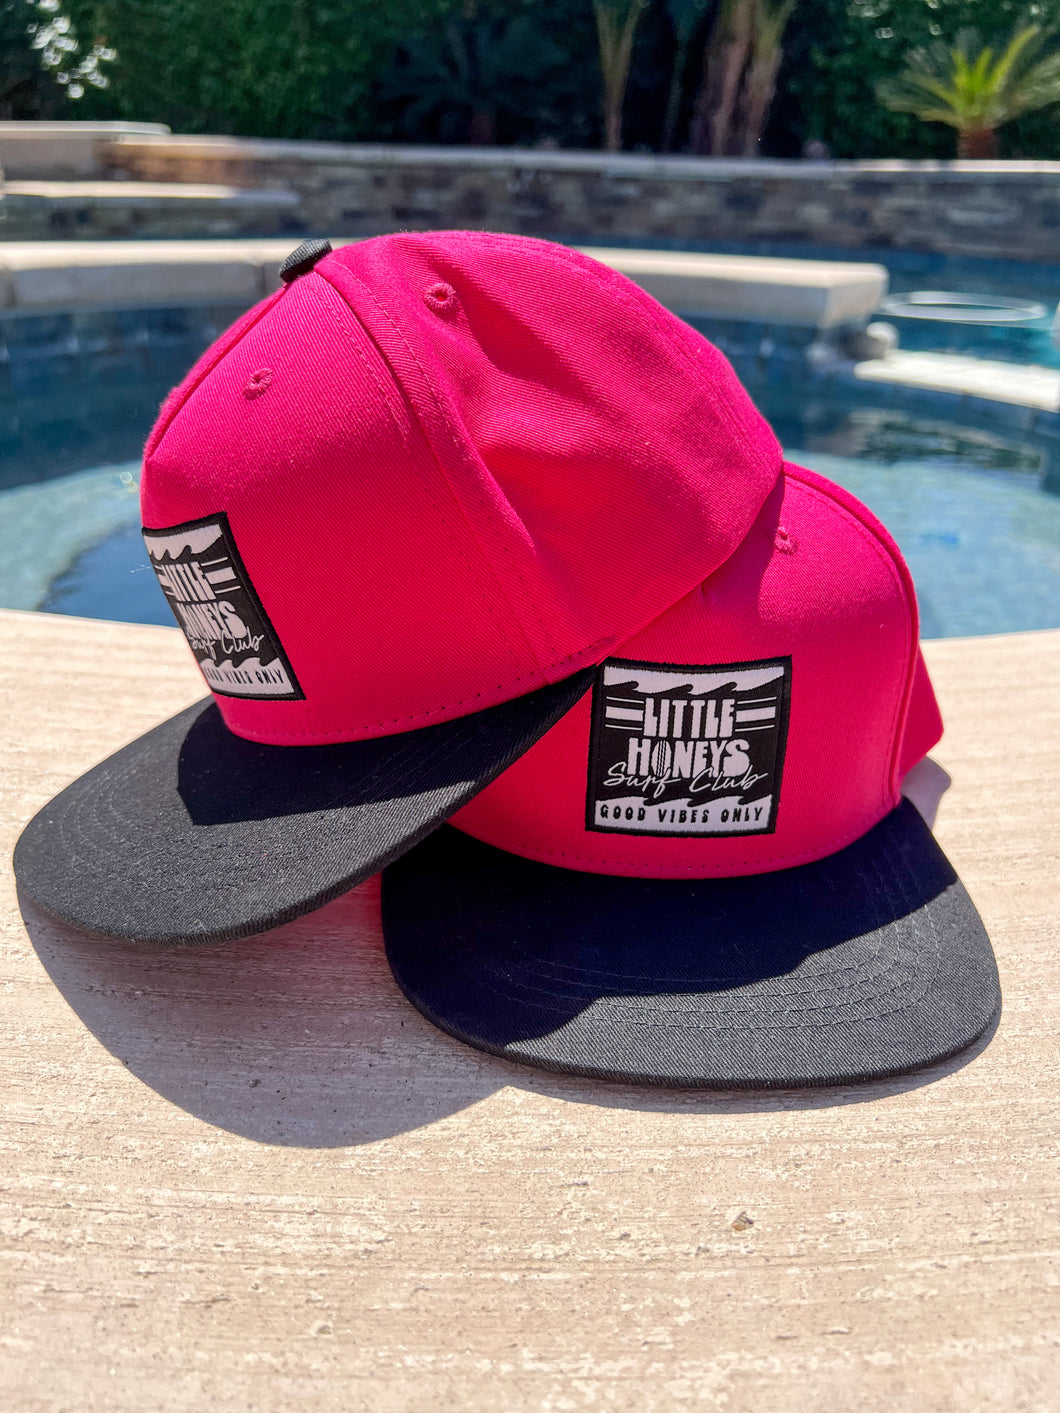 “Good Vibes Only” Hot pink snapback